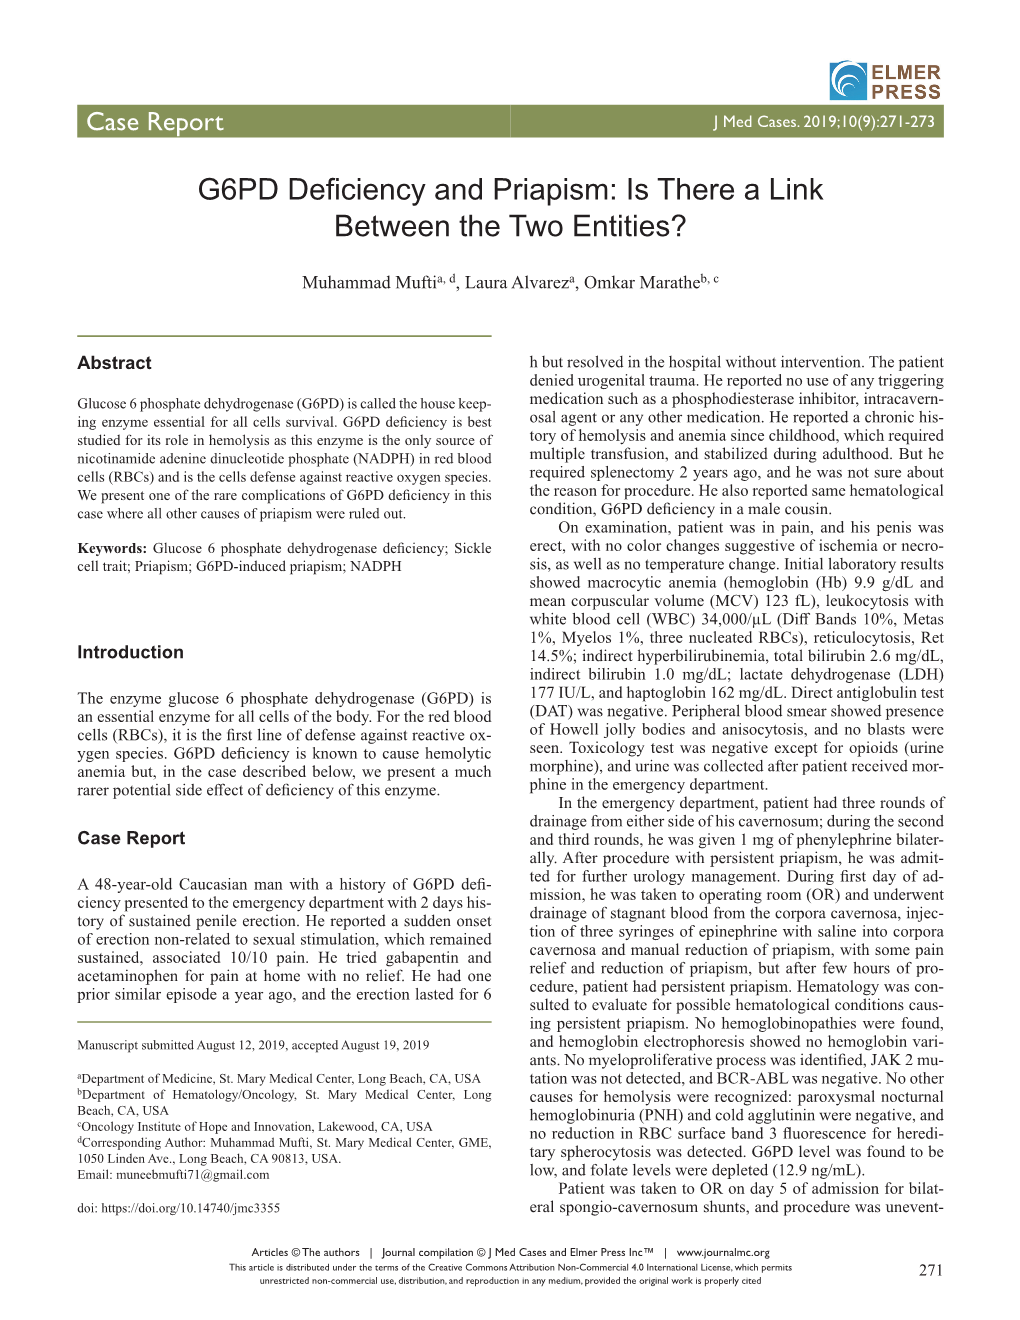 G6PD Deficiency and Priapism: Is There a Link Between the Two Entities?